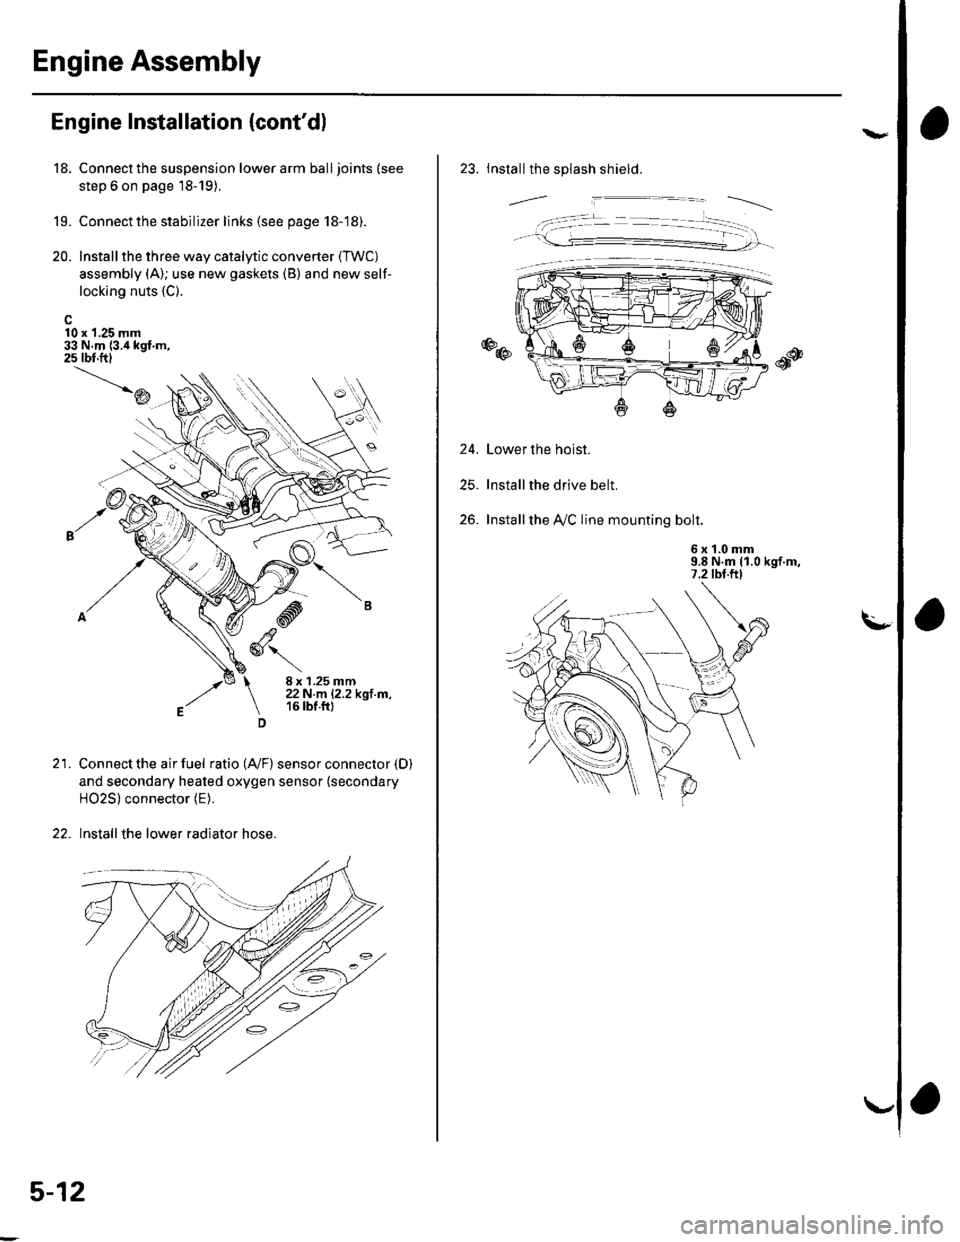 HONDA CIVIC 2003 7.G Workshop Manual Engine Assembly
18.
Engine Installation {contdl
10 x 1.25 mm33 N.m {3.i1kgf.m,25 tbt.ftl
19.
20.
Connect the suspension lower arm ball joints (see
step 6 on page 18-19).
Connect the stabilizer links 